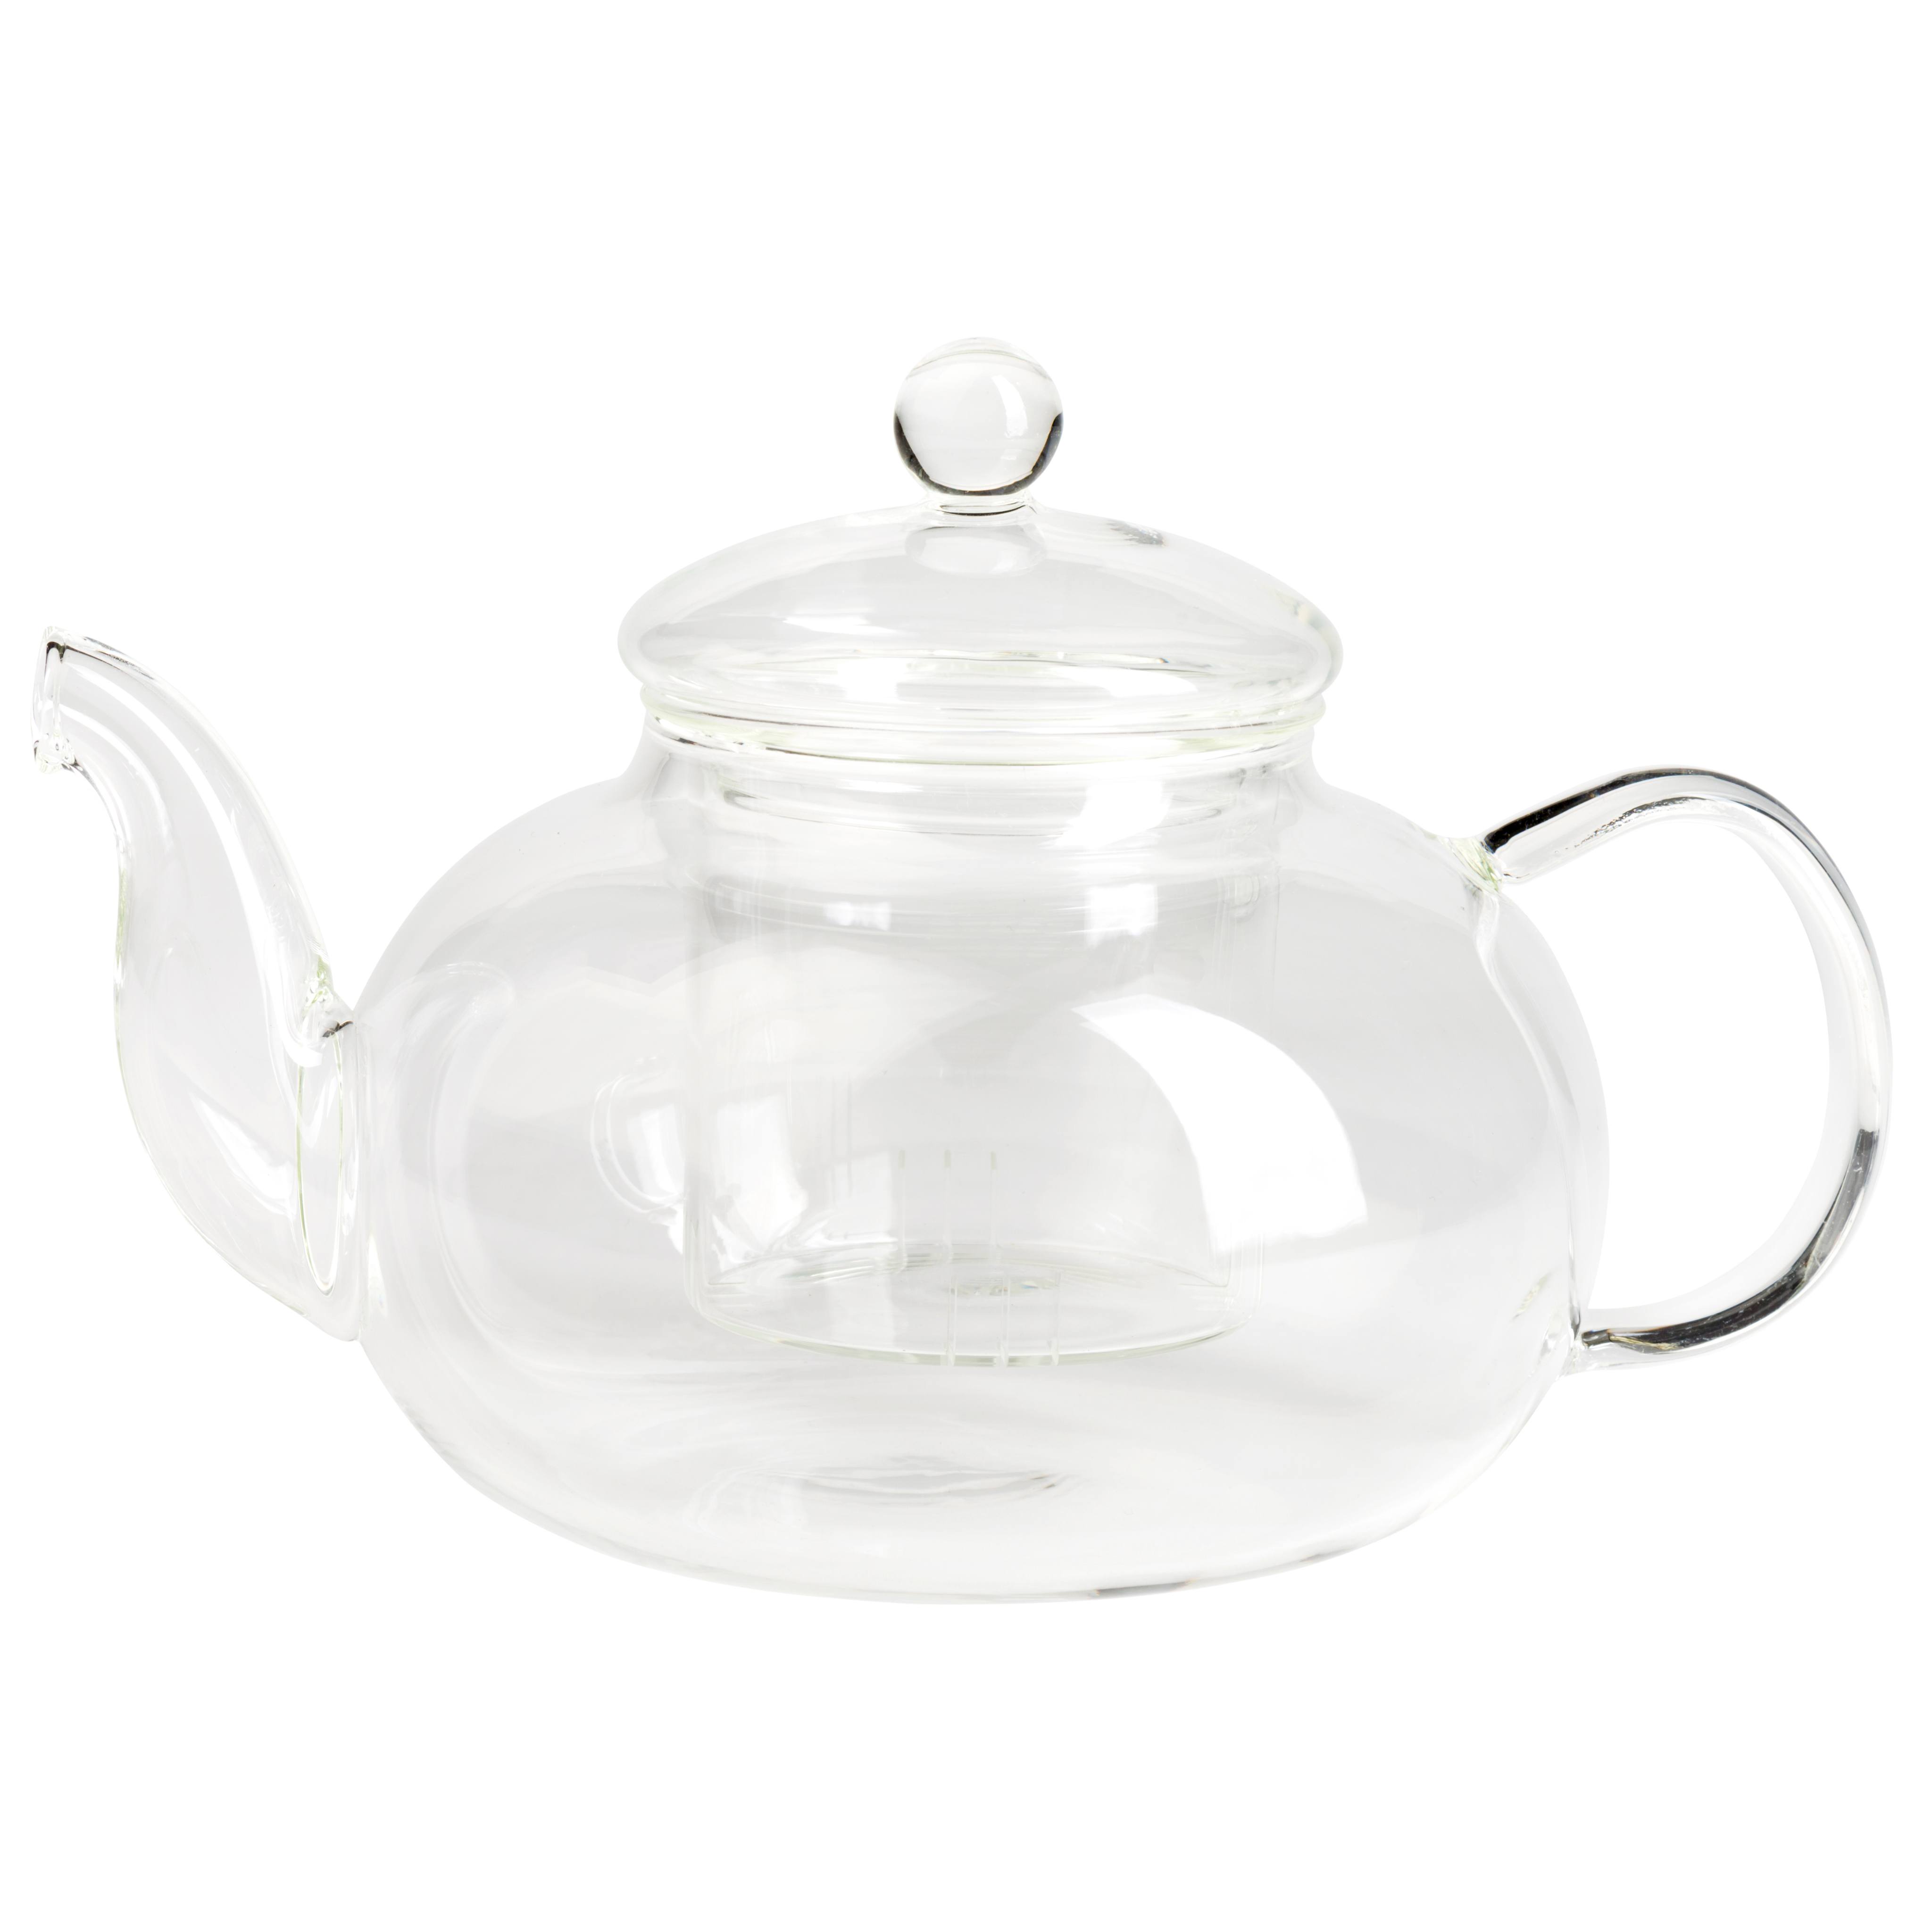 https://www.thehopeandglory.co.uk/wp-content/uploads/2019/05/glass-teapot-with-glass-infuser.jpg